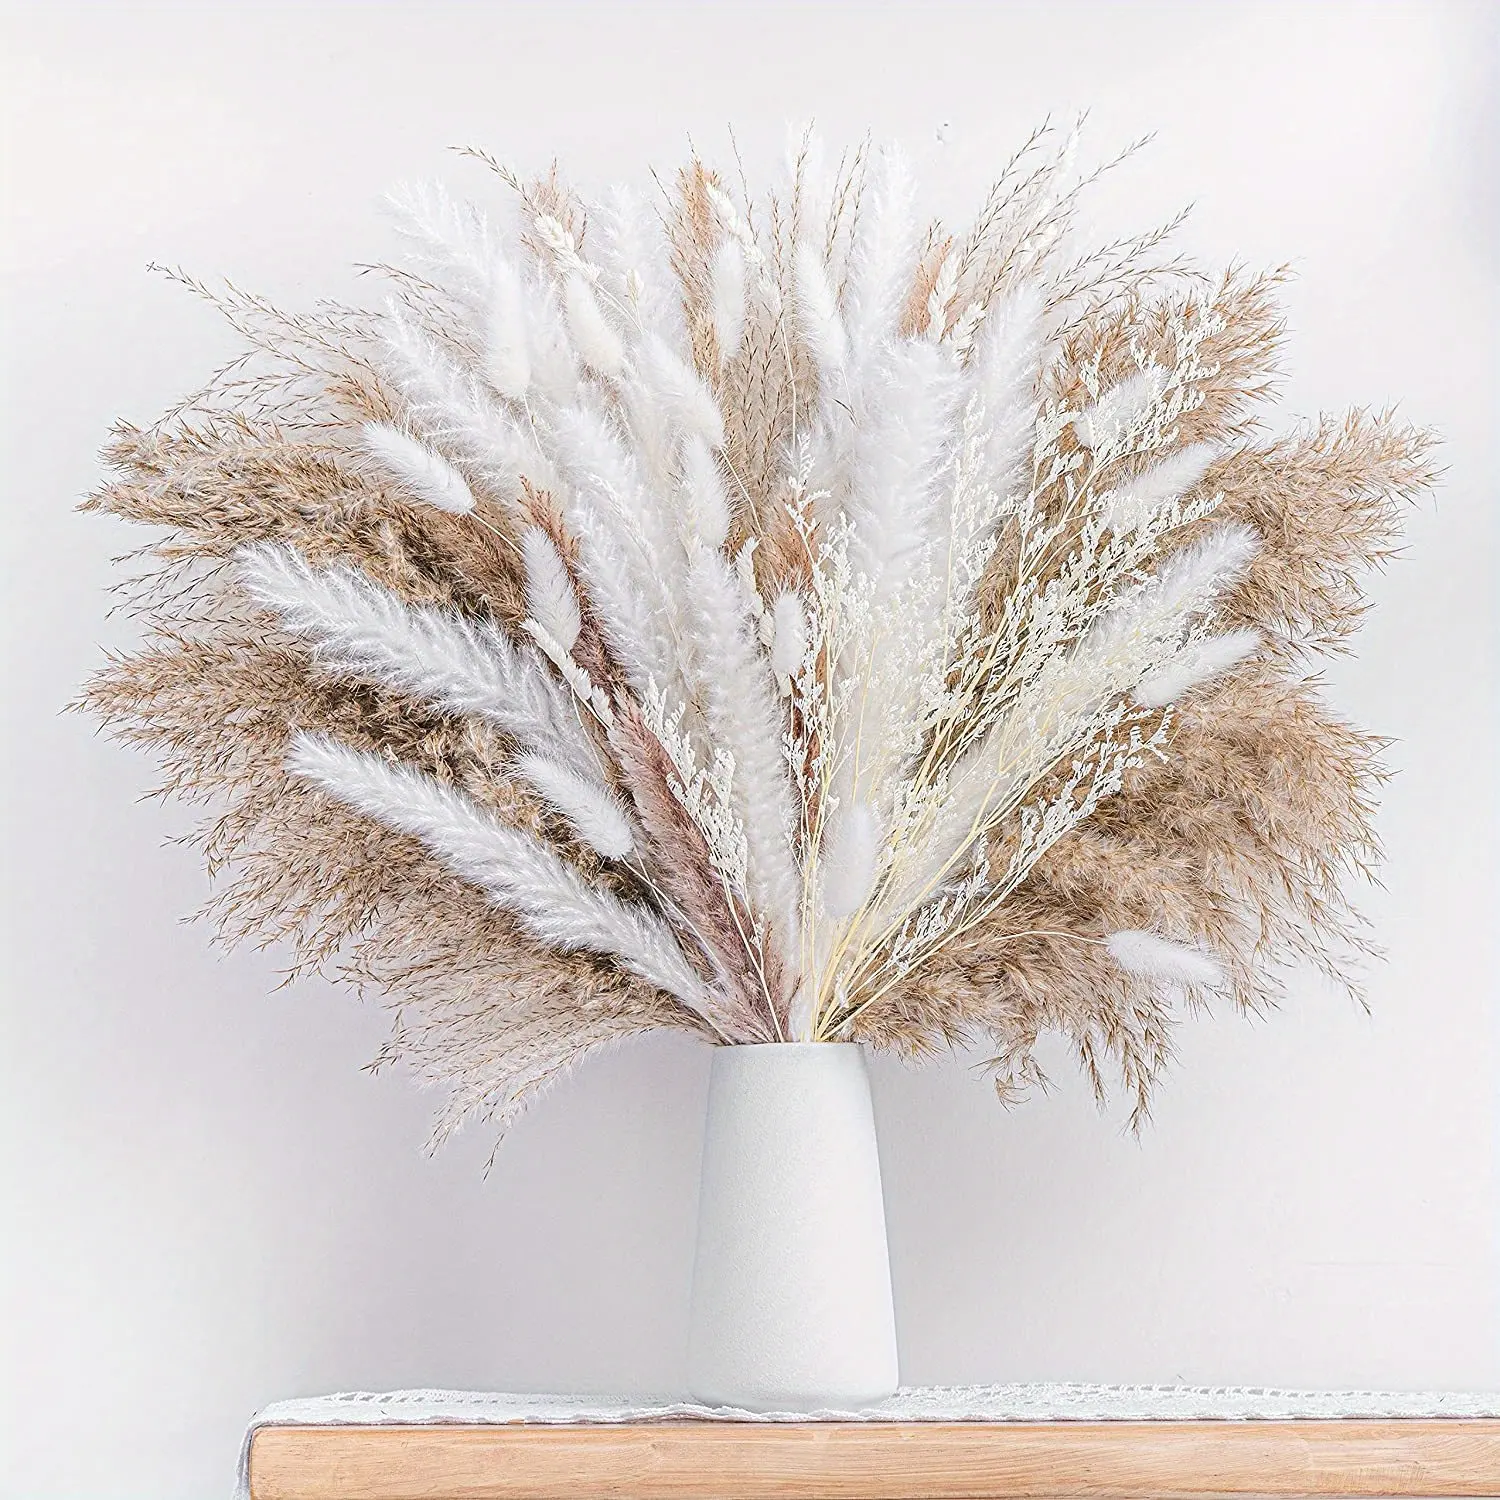 USA In Stock 50pcs White Pampas Grass Natural Dried Pompous Grass For DIY Bouquets And Floral Arrangement For Home Room Decor